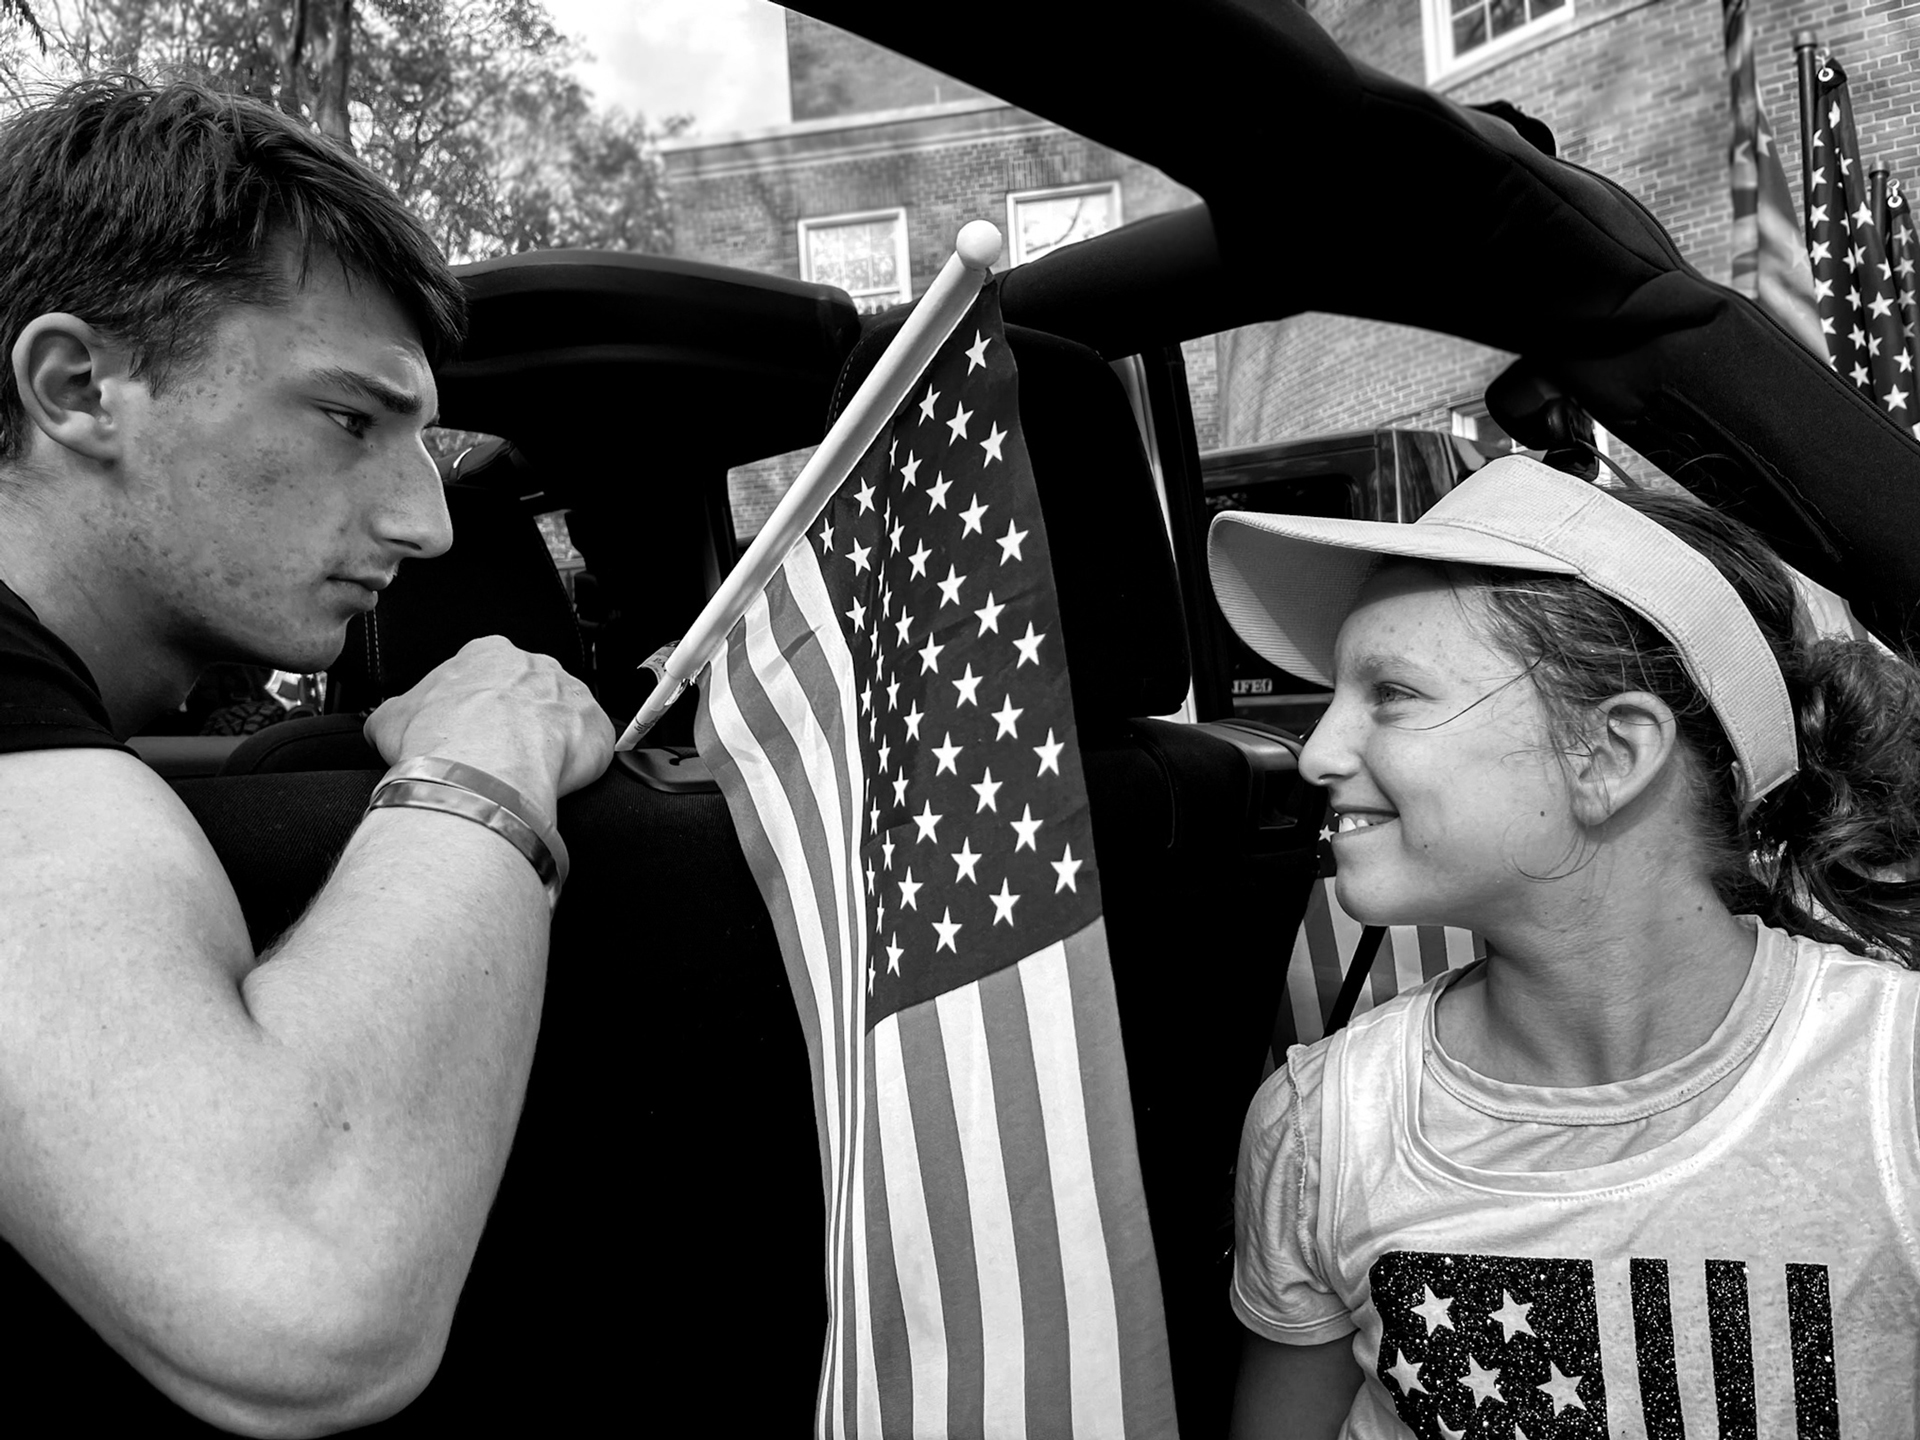 Black and white photograph of two people with an American flag between them